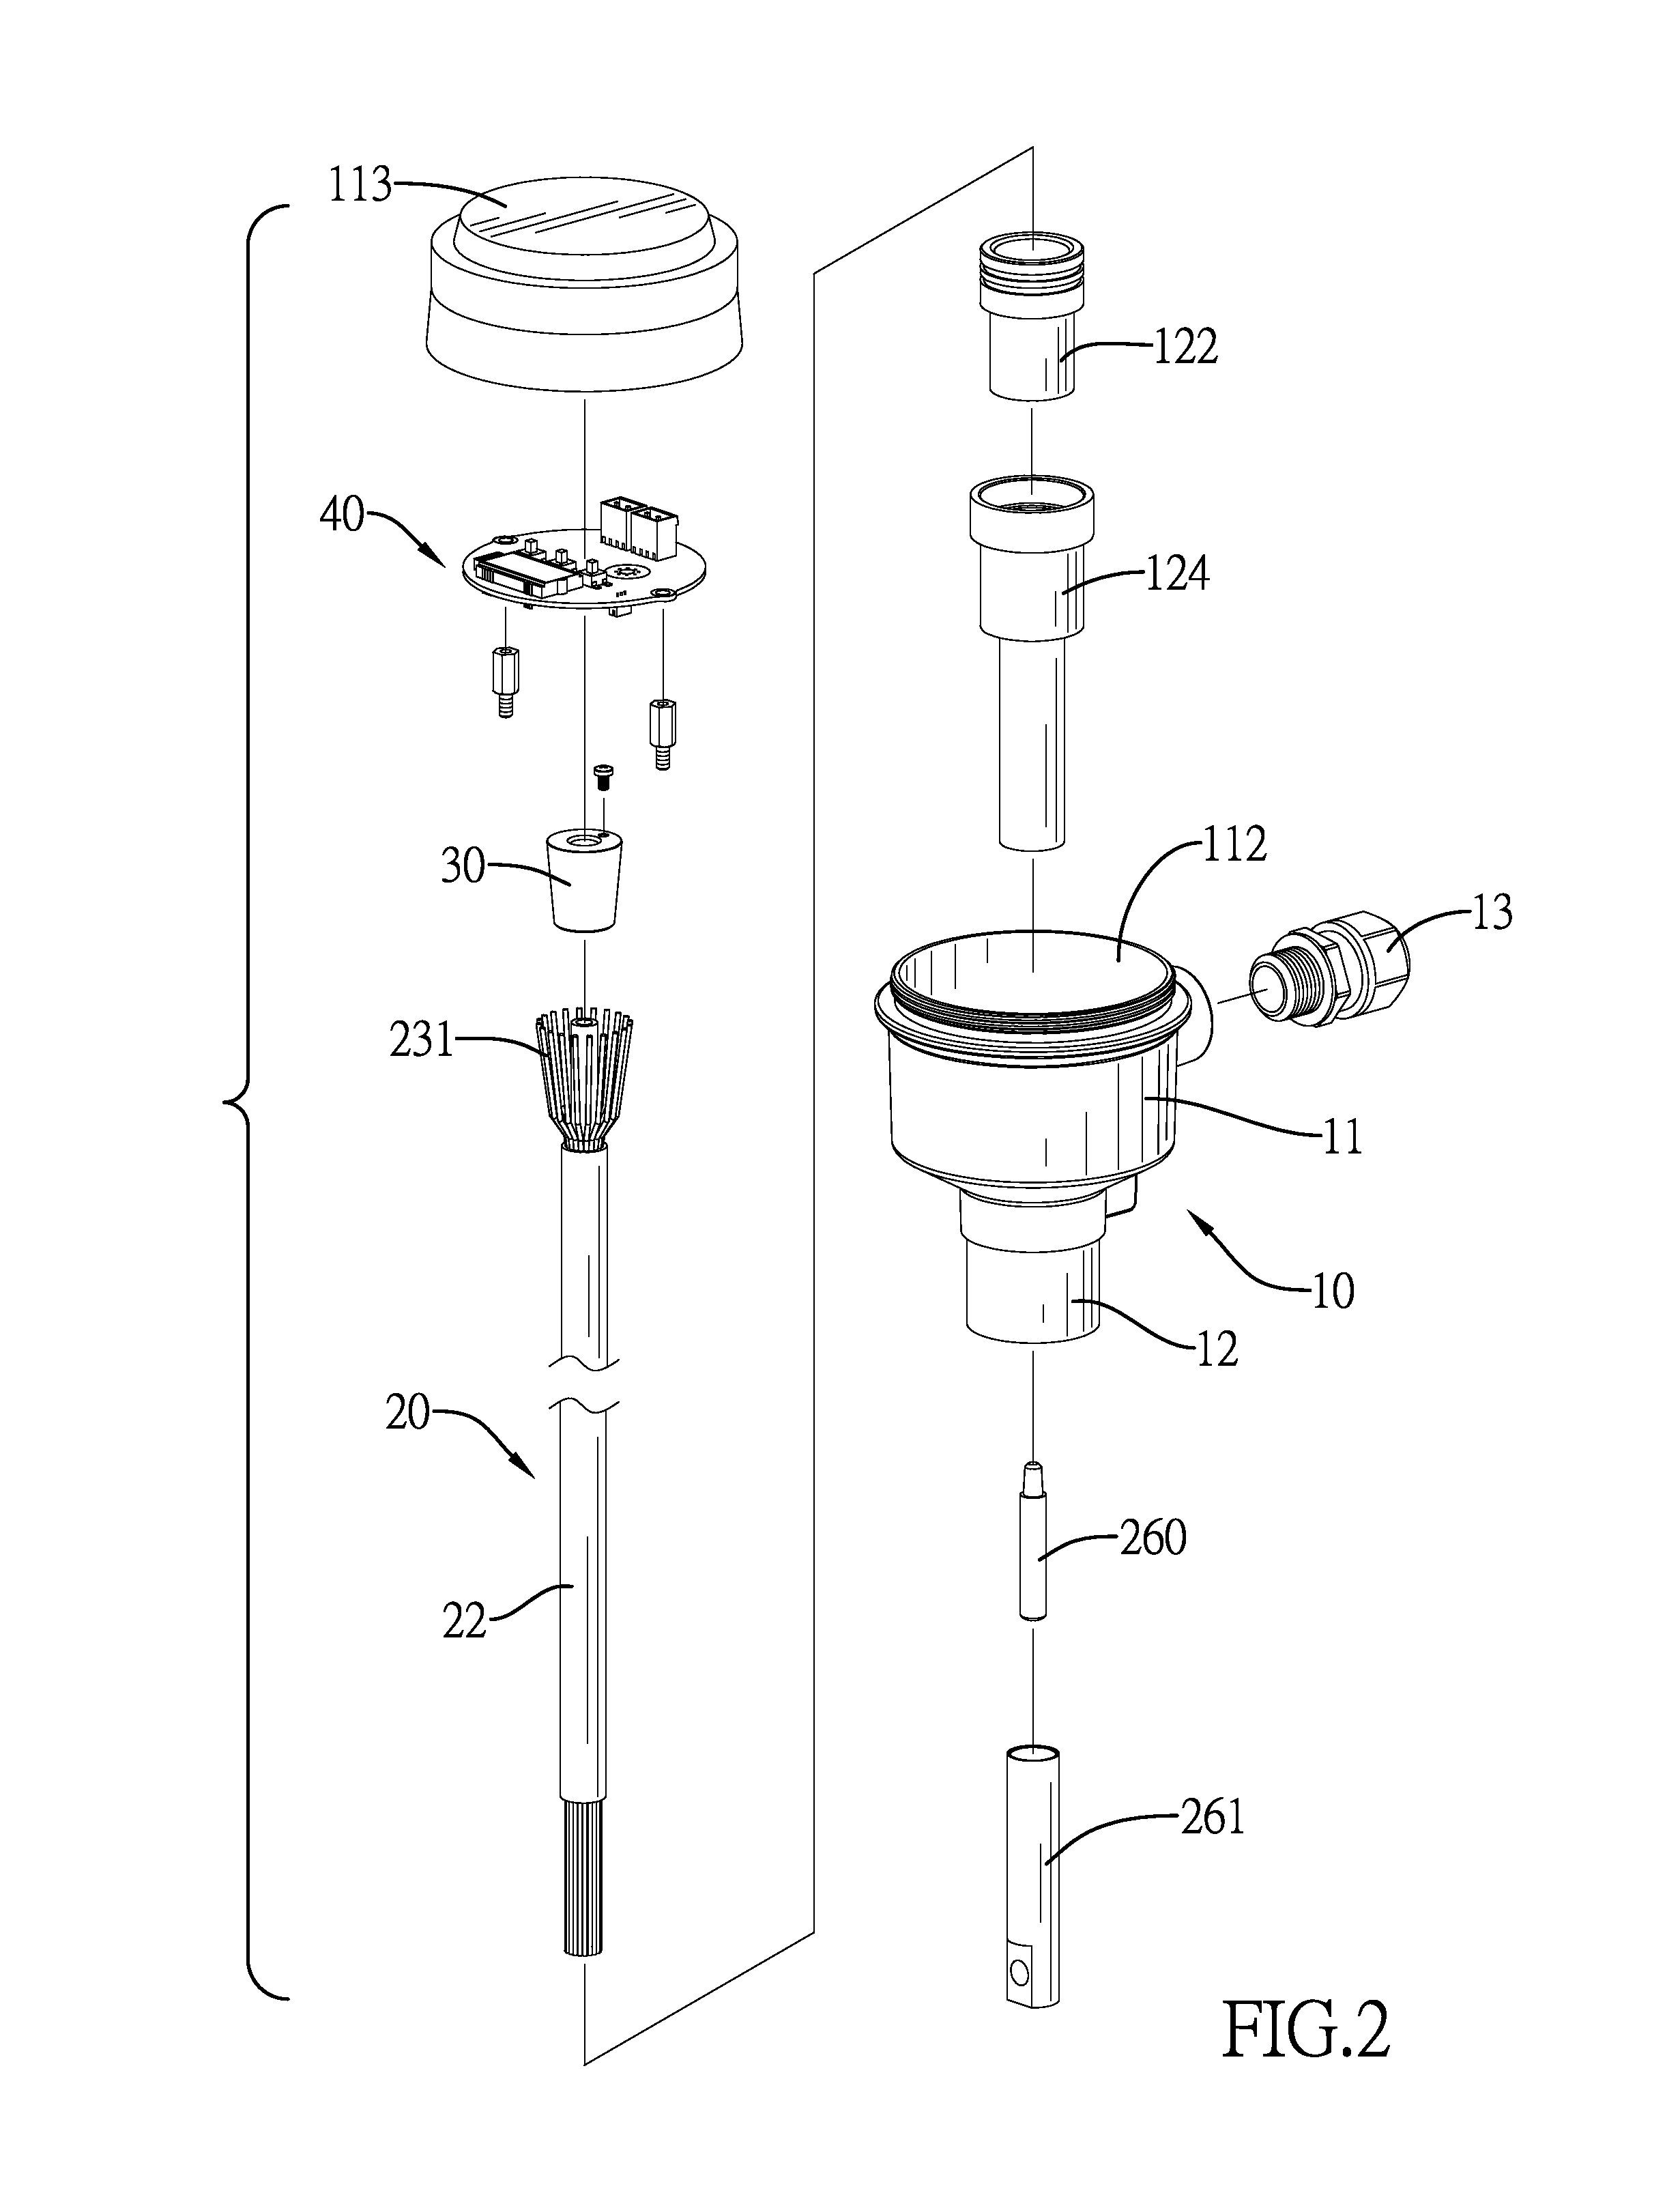 Cable-Based Sensor for Detecting Material Level and Temperature